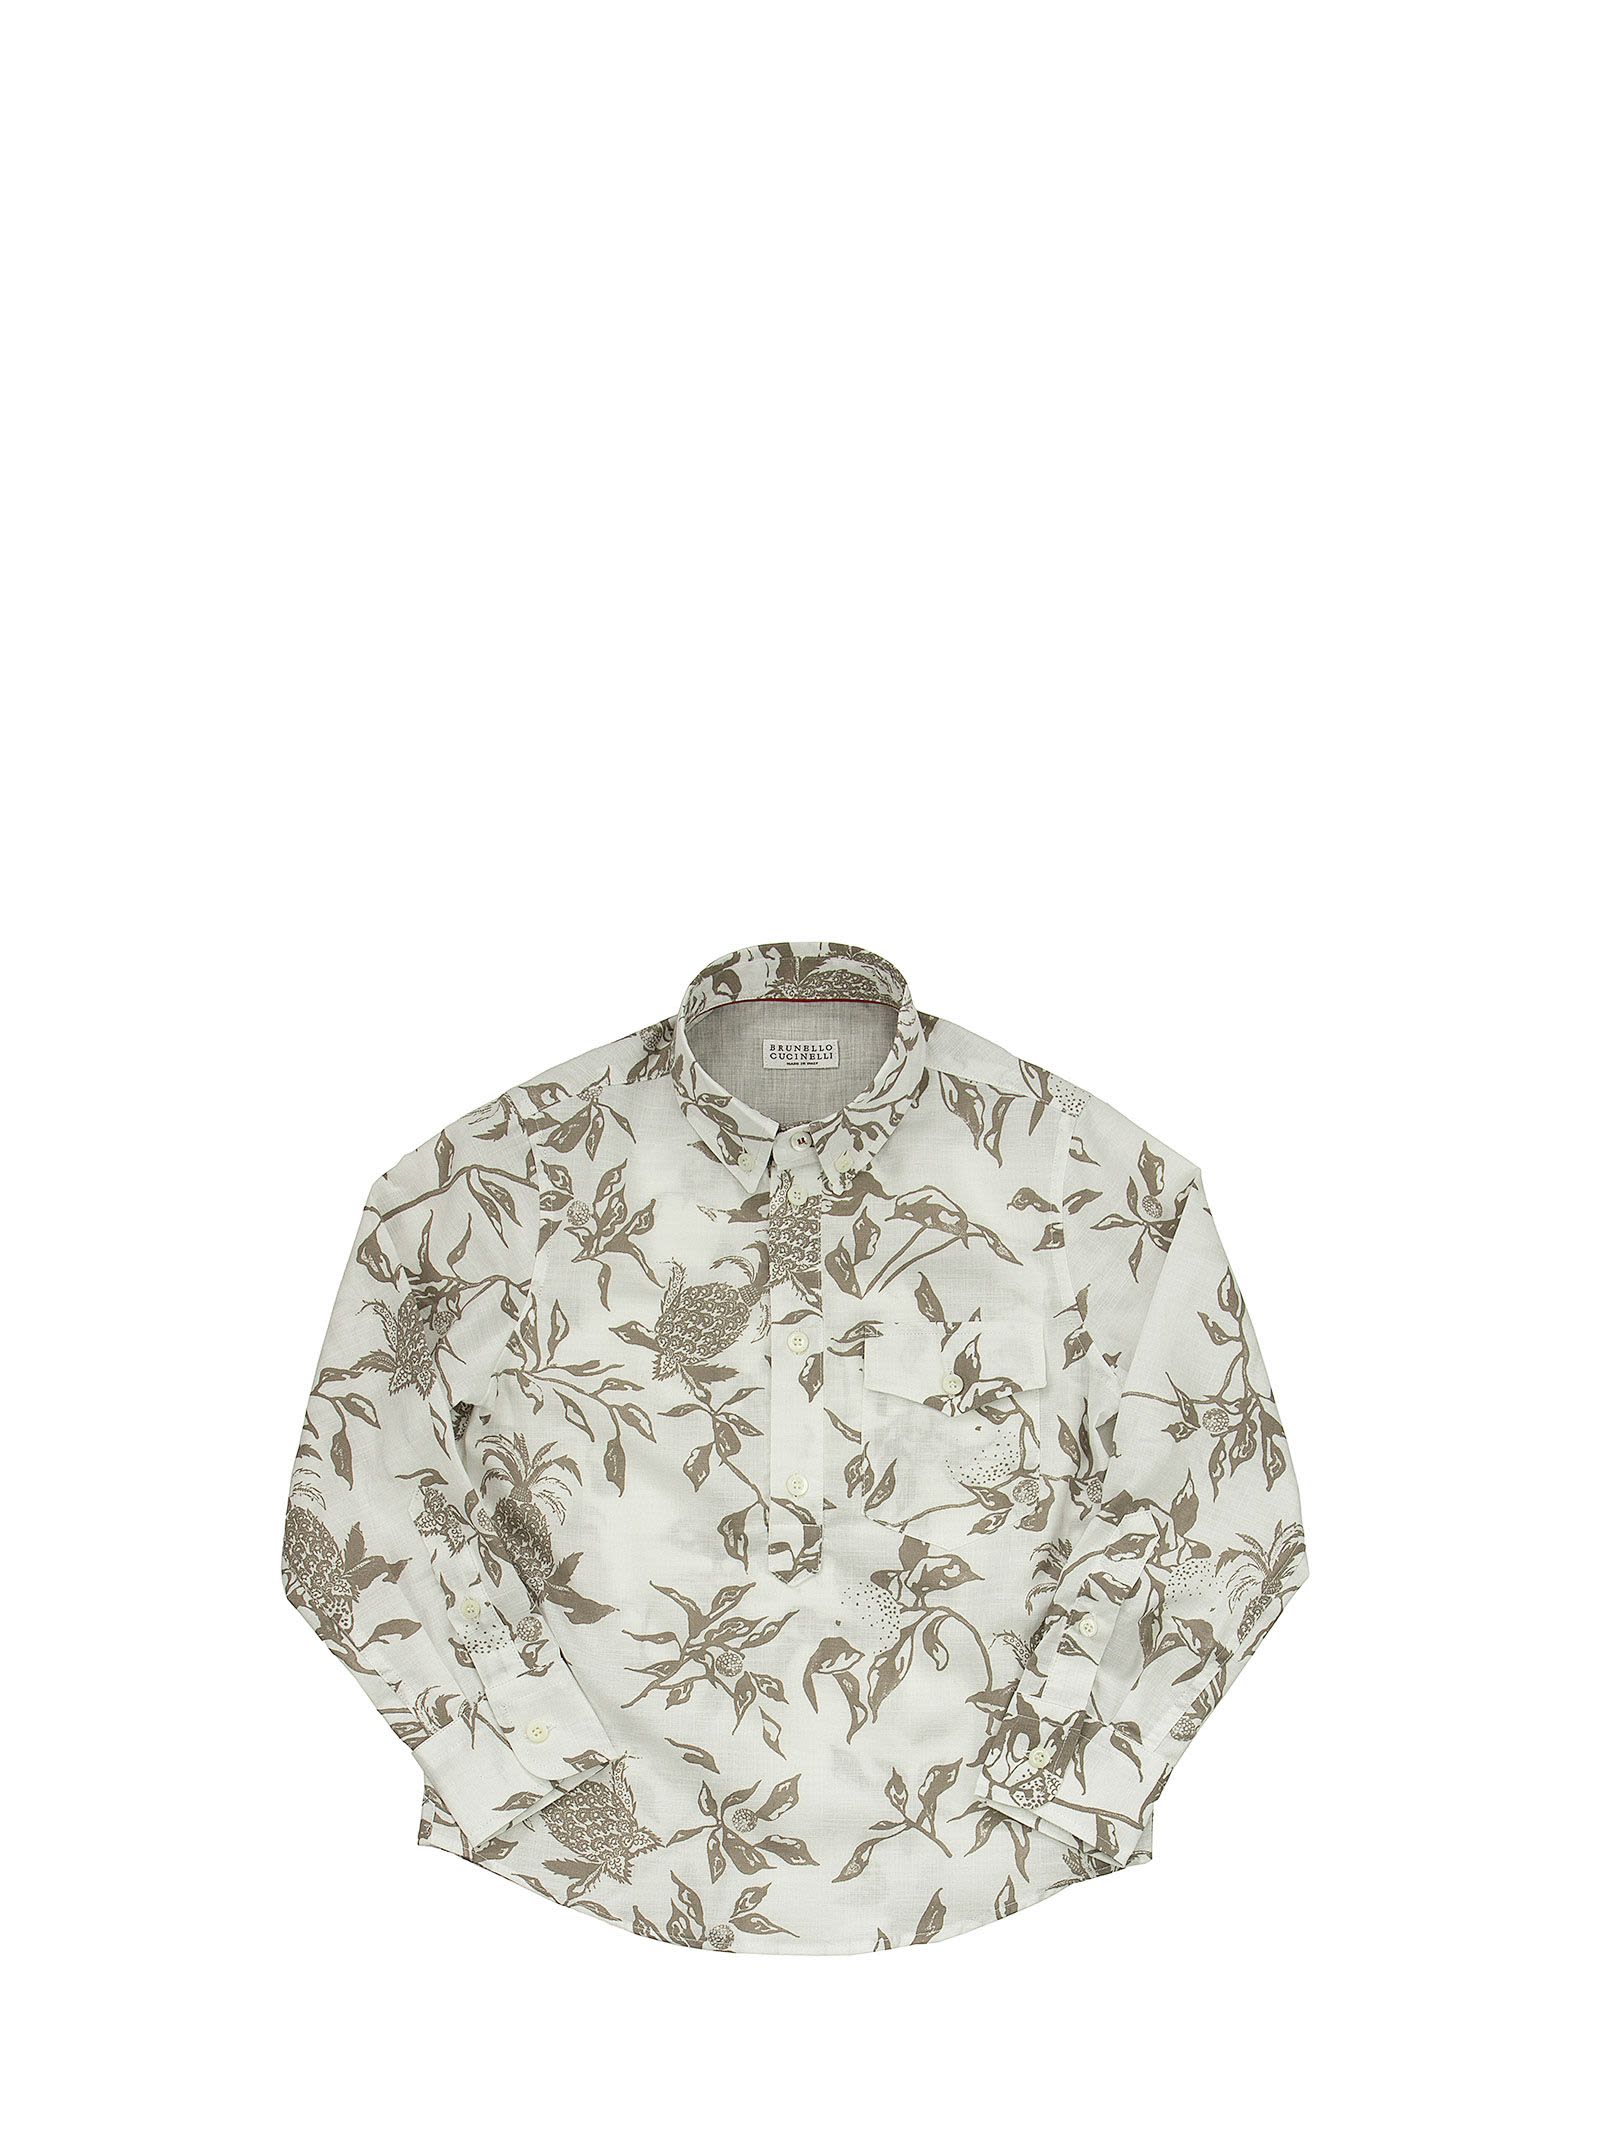 Brunello Cucinelli Cotton Tropical Print Shirt With Chest Pocket